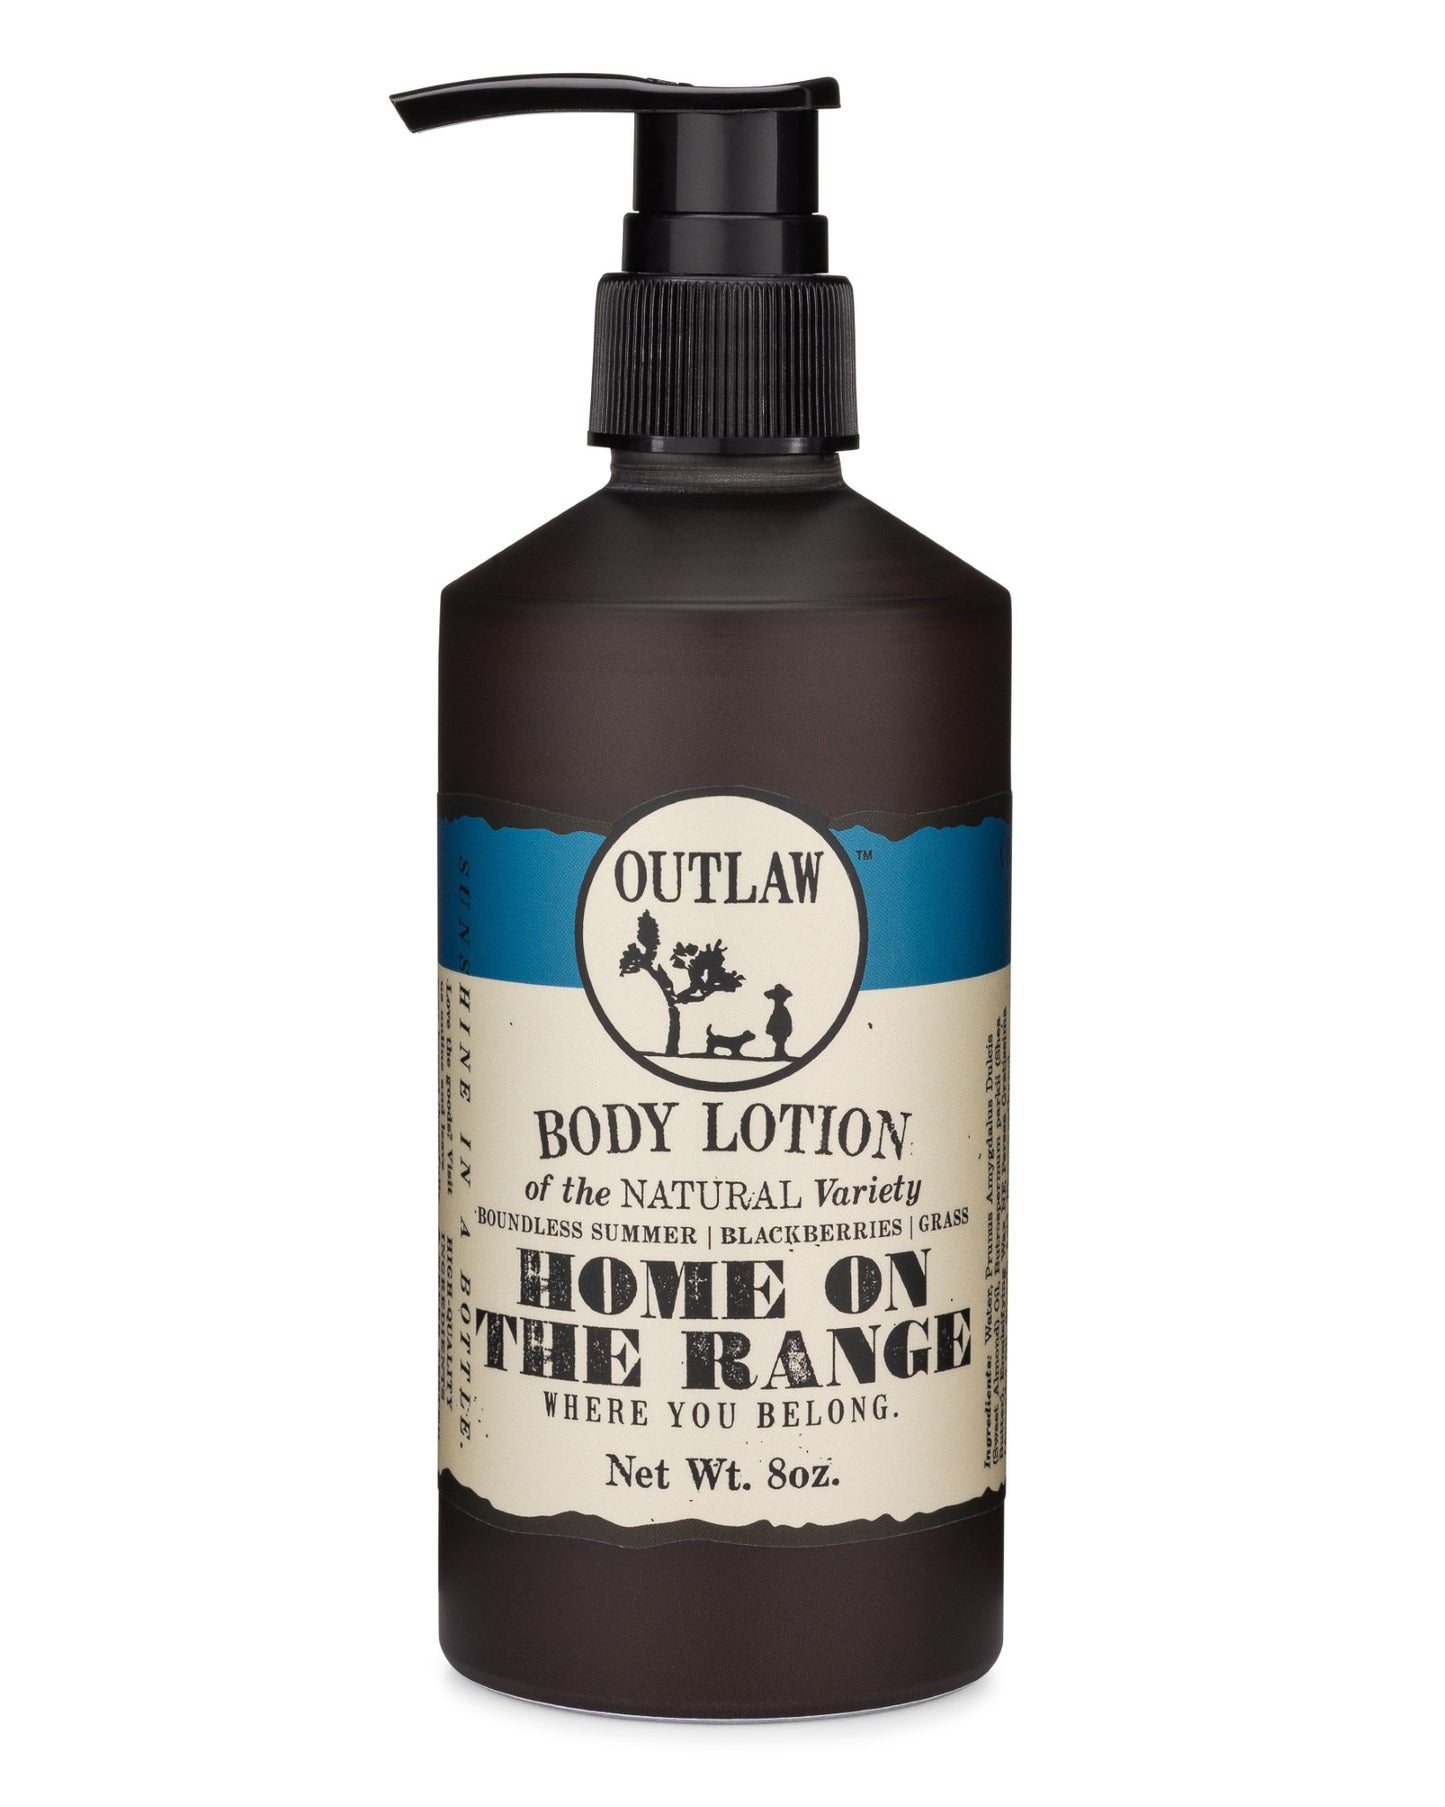 Outlaw Home on the Range Body Lotion